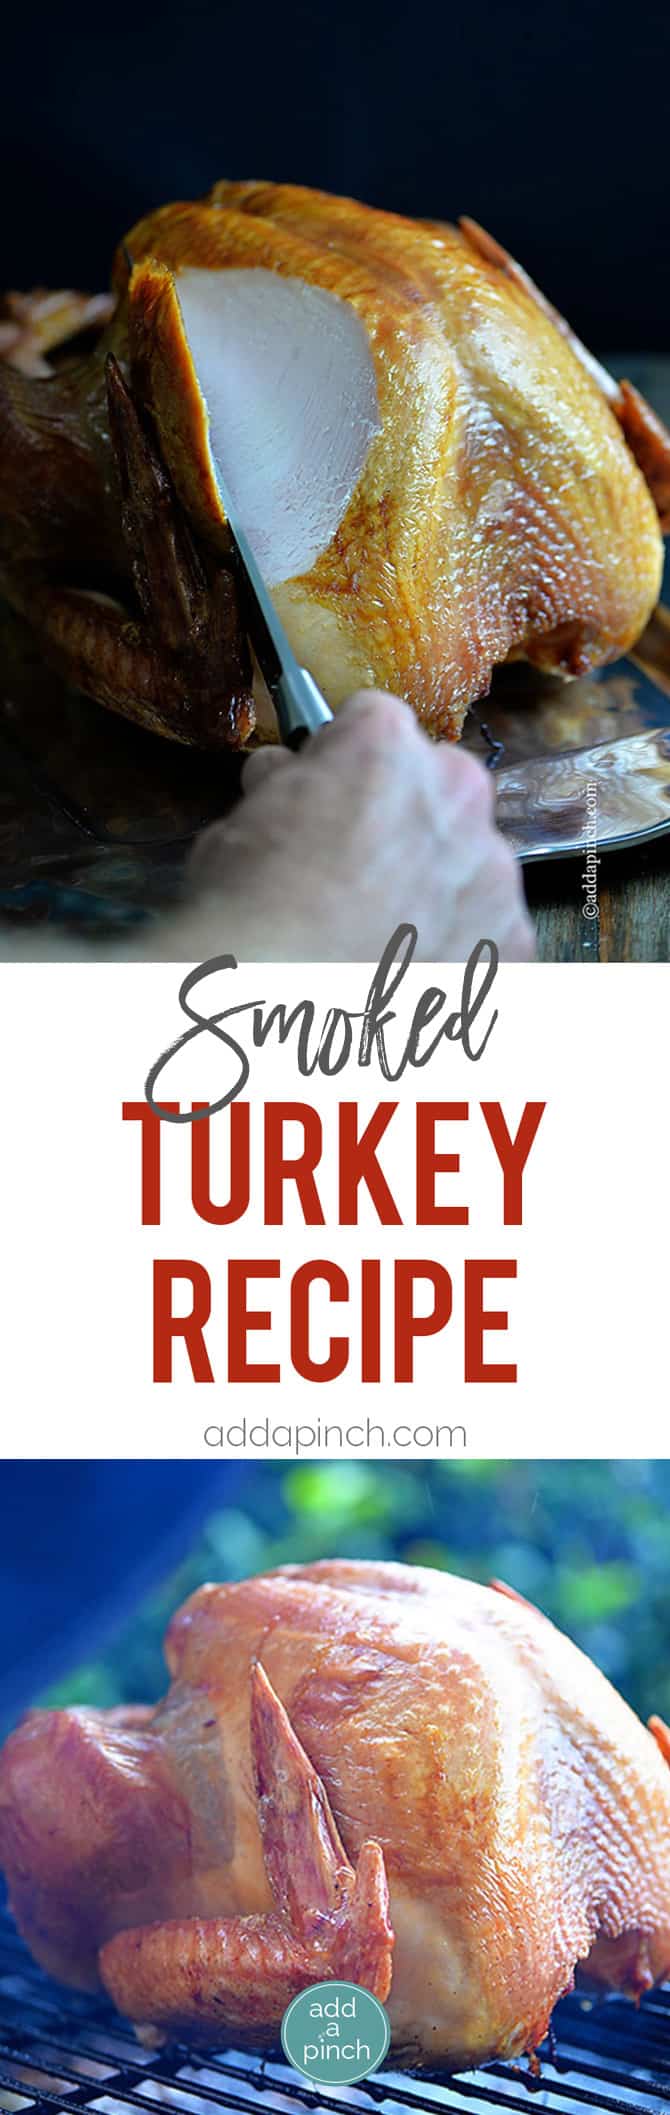 Smoked Turkey Recipe - This simple, yet scrumptious smoked turkey brings the juiciest and most flavorful turkey to your Thanksgiving table. // addapinch.com